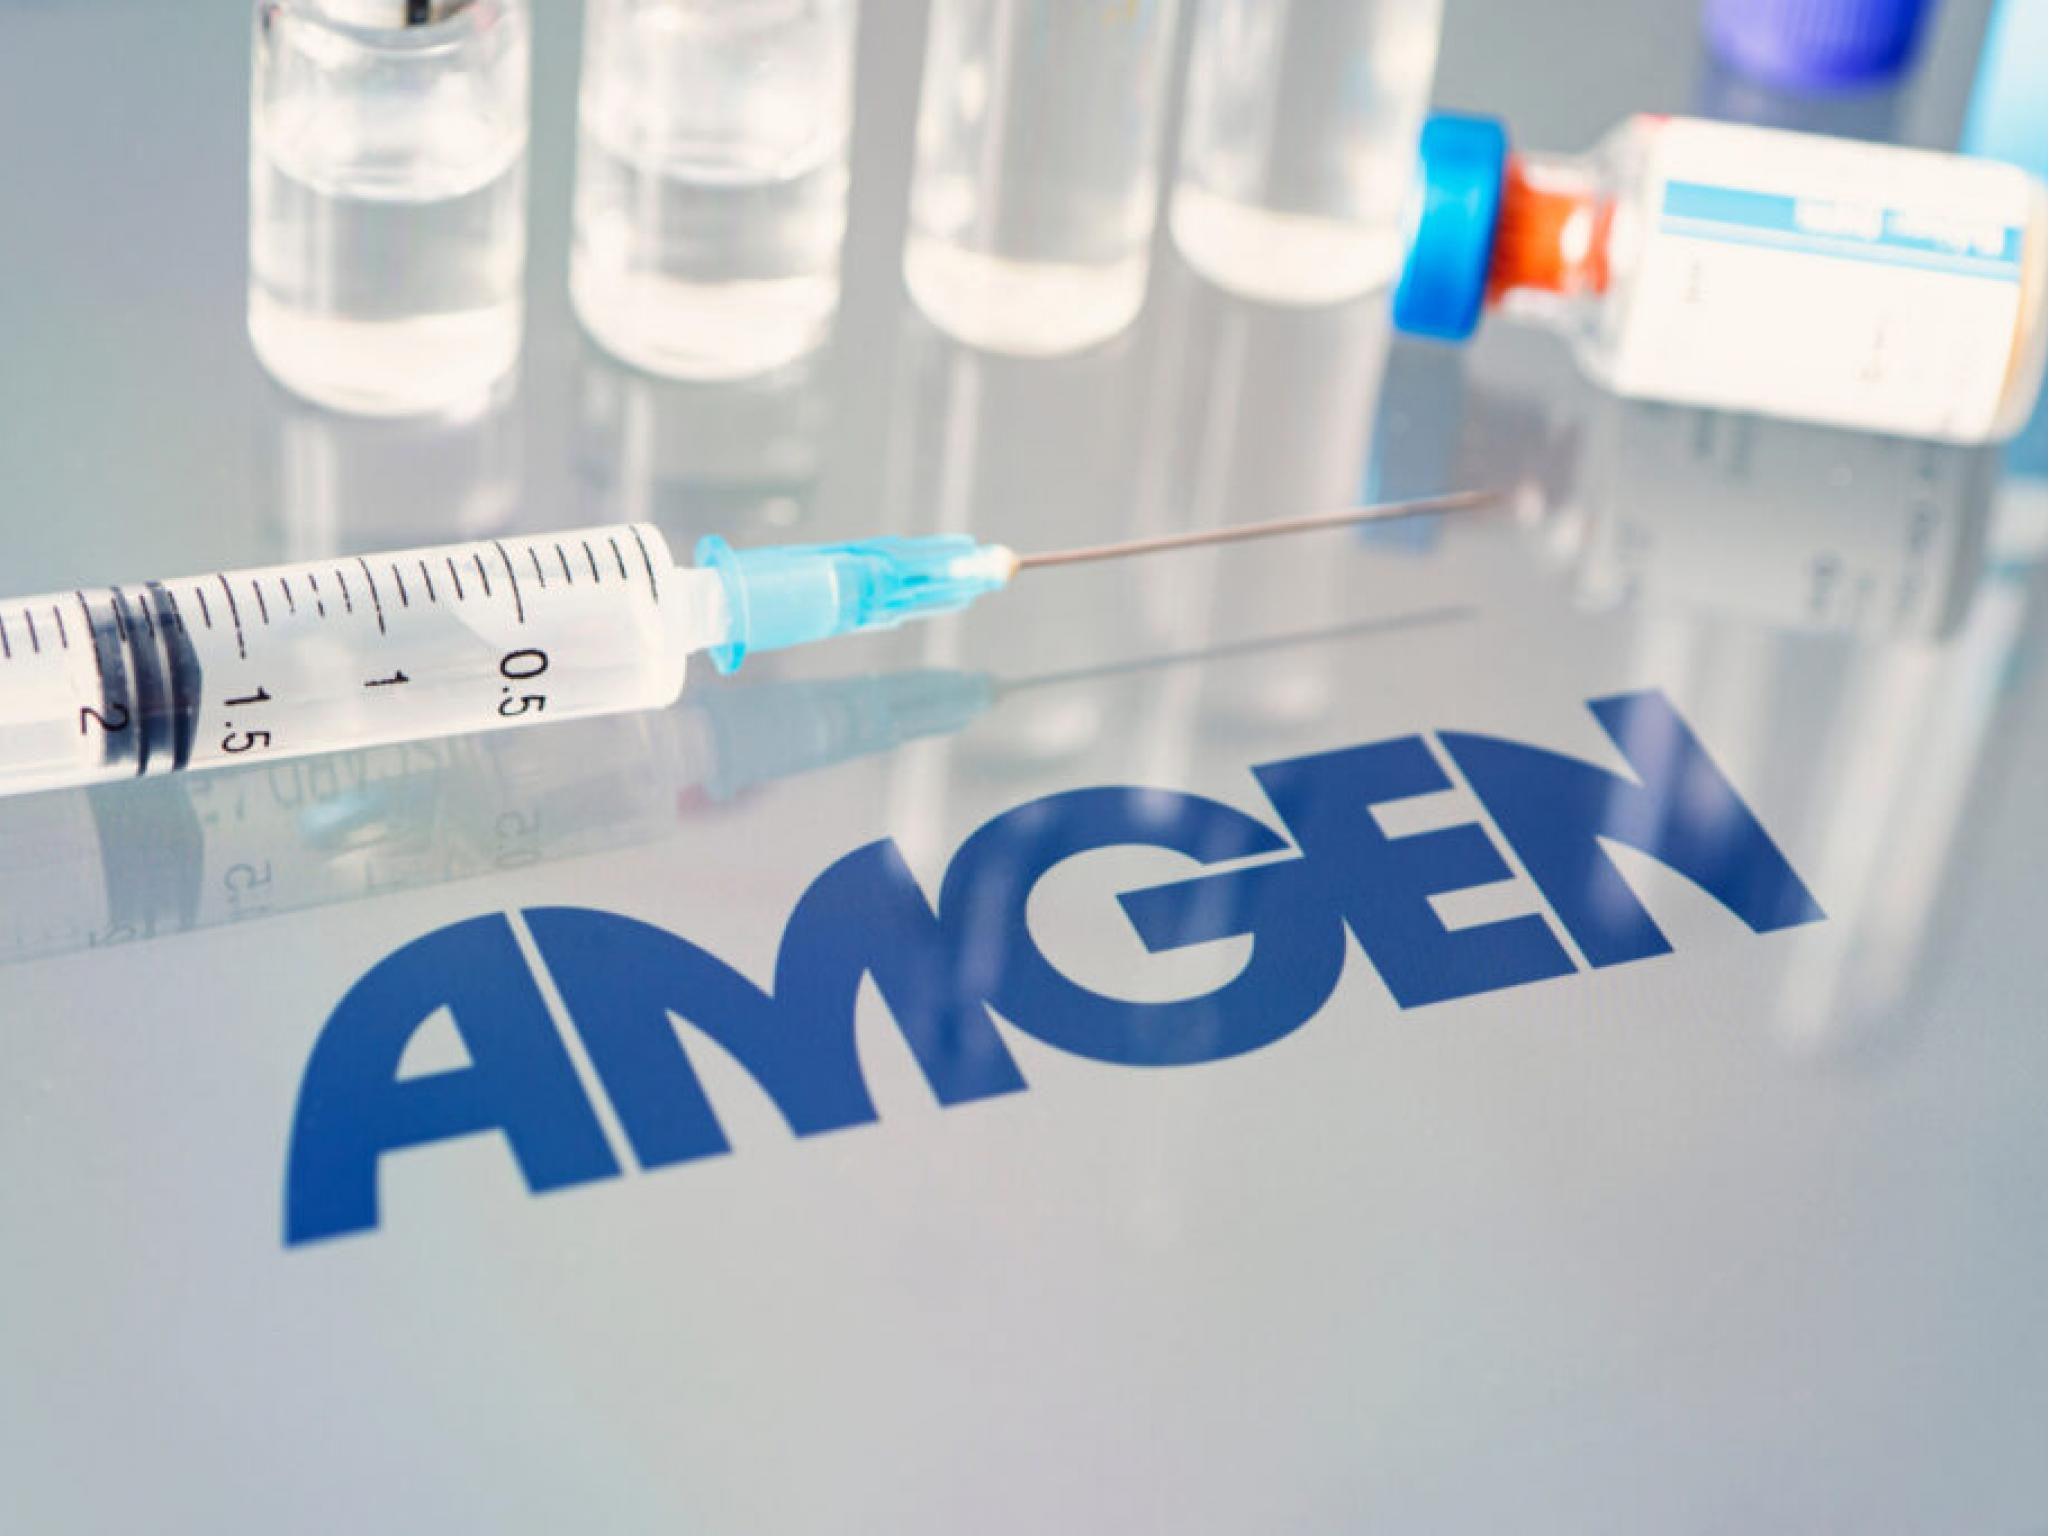  amgen-posts-upbeat-results-joins-onespan-paylocity-holding-mercadolibre-and-other-big-stocks-moving-higher-on-friday 